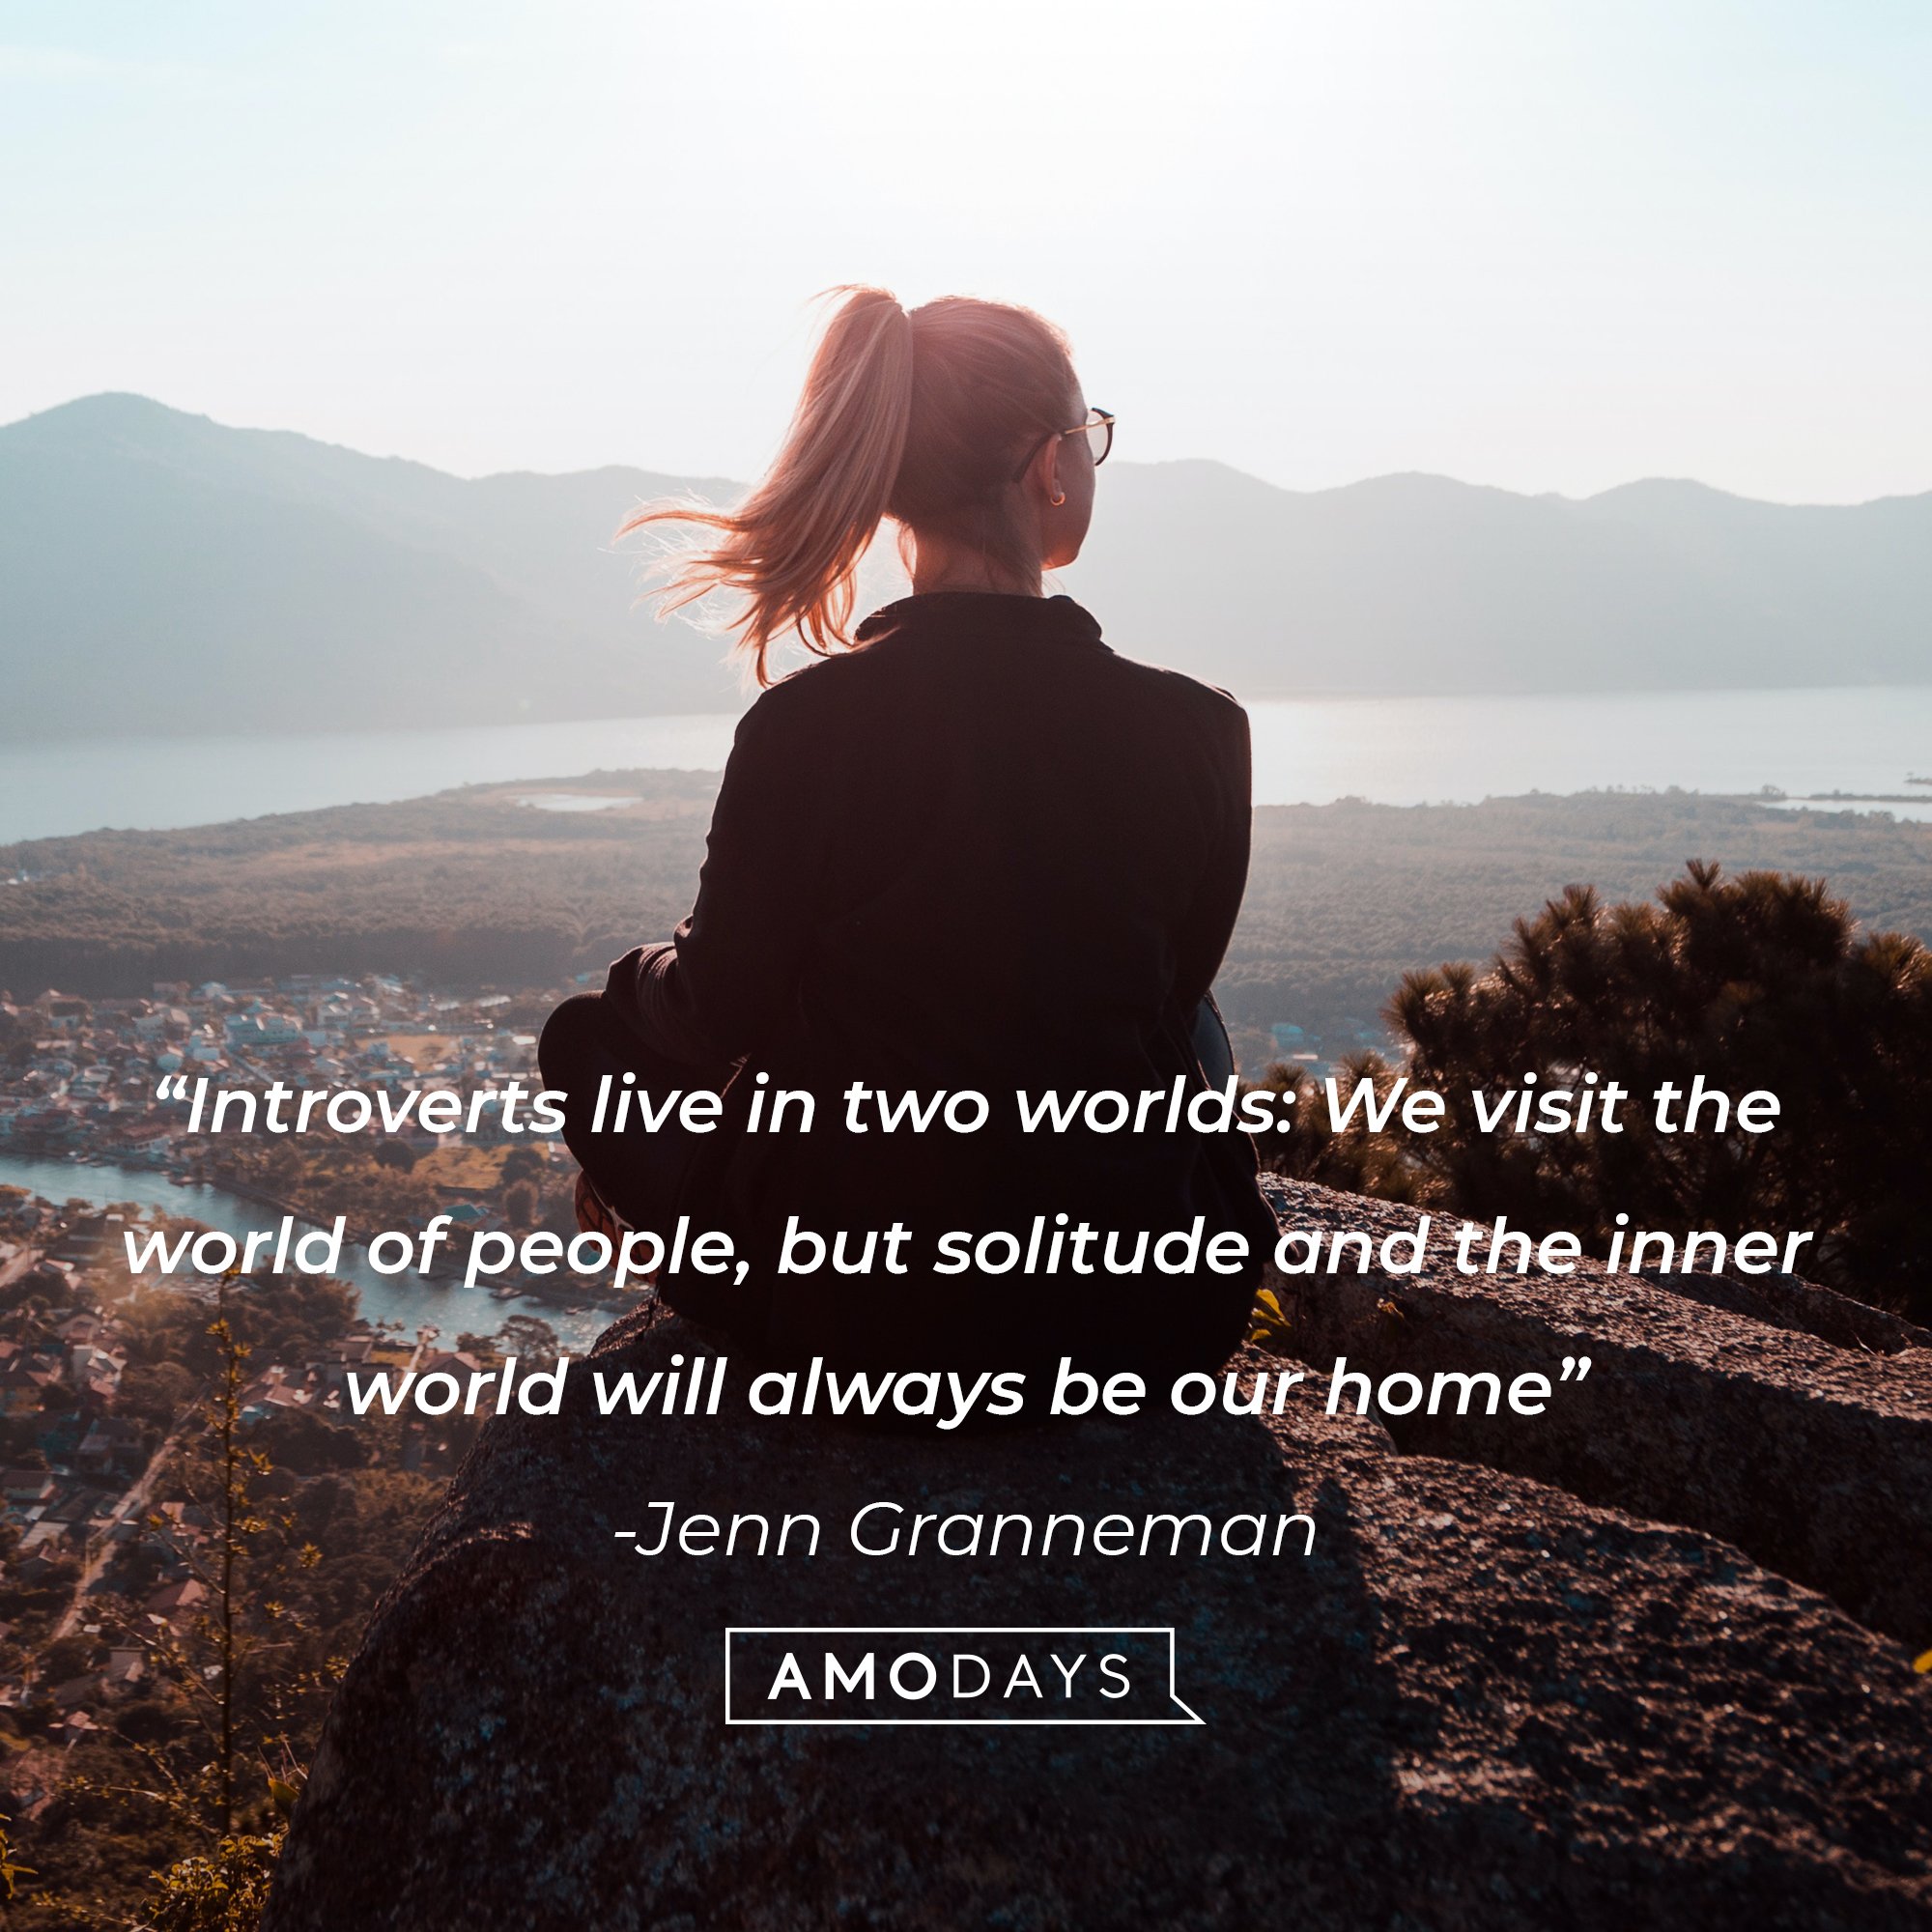 Jenn Granneman's quote: “Introverts live in two worlds: We visit the world of people, but solitude and the inner world will always be our home.” | Image: AmoDays